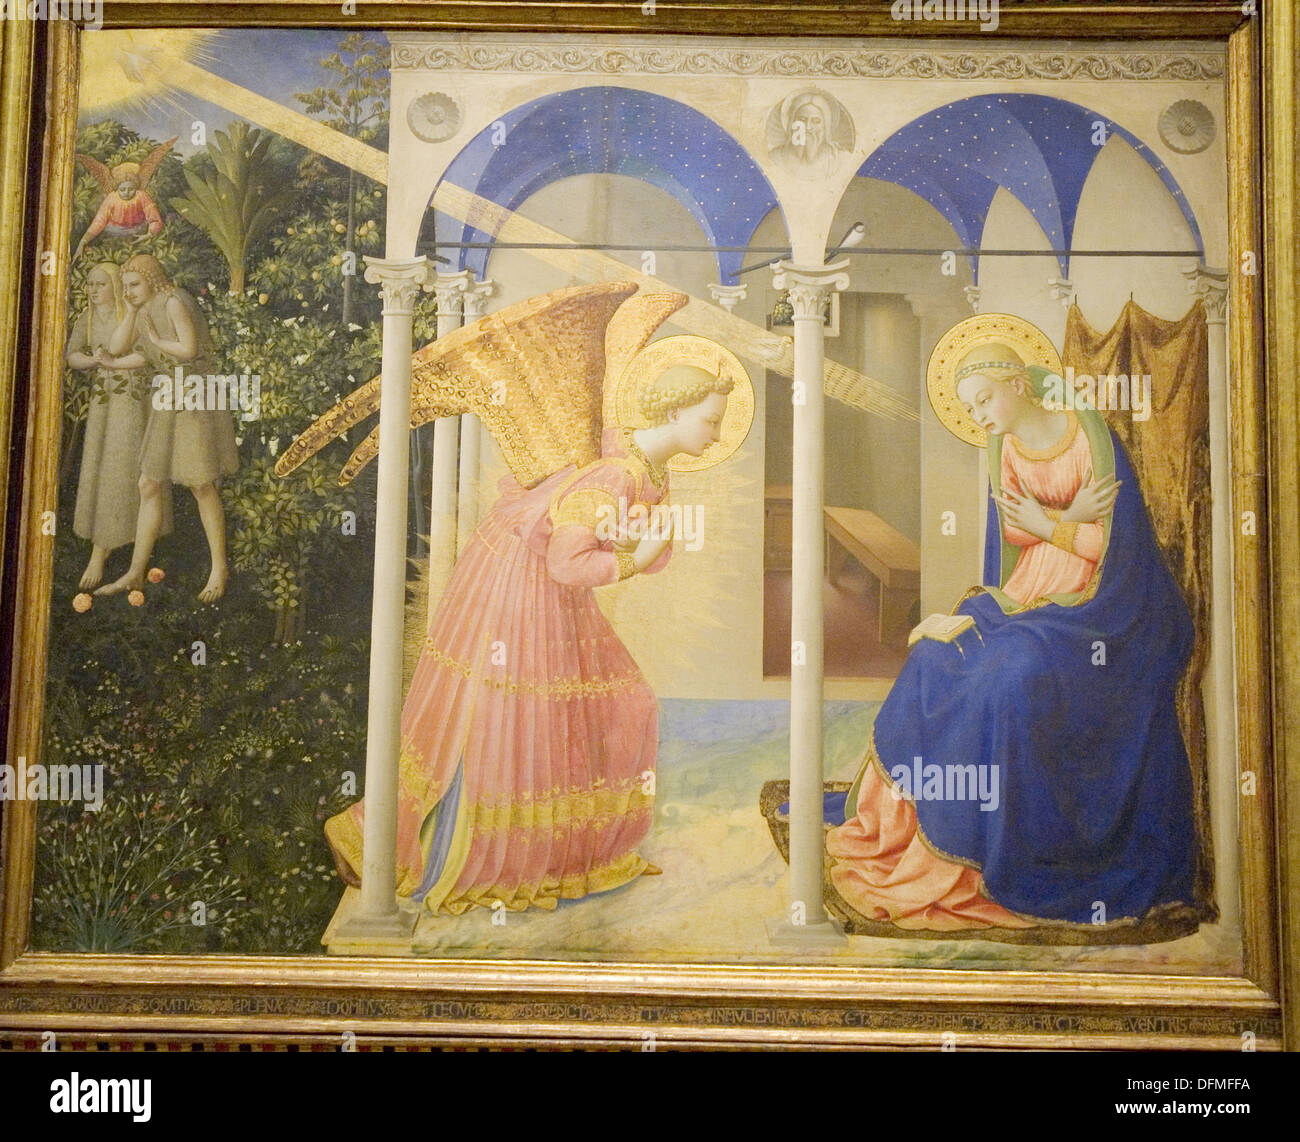 The Annunciation. Ca. 1426. Fran Angelico. Gold and tempera on wooden pannel. Prado Museum. Madrid. Spain. Stock Photo